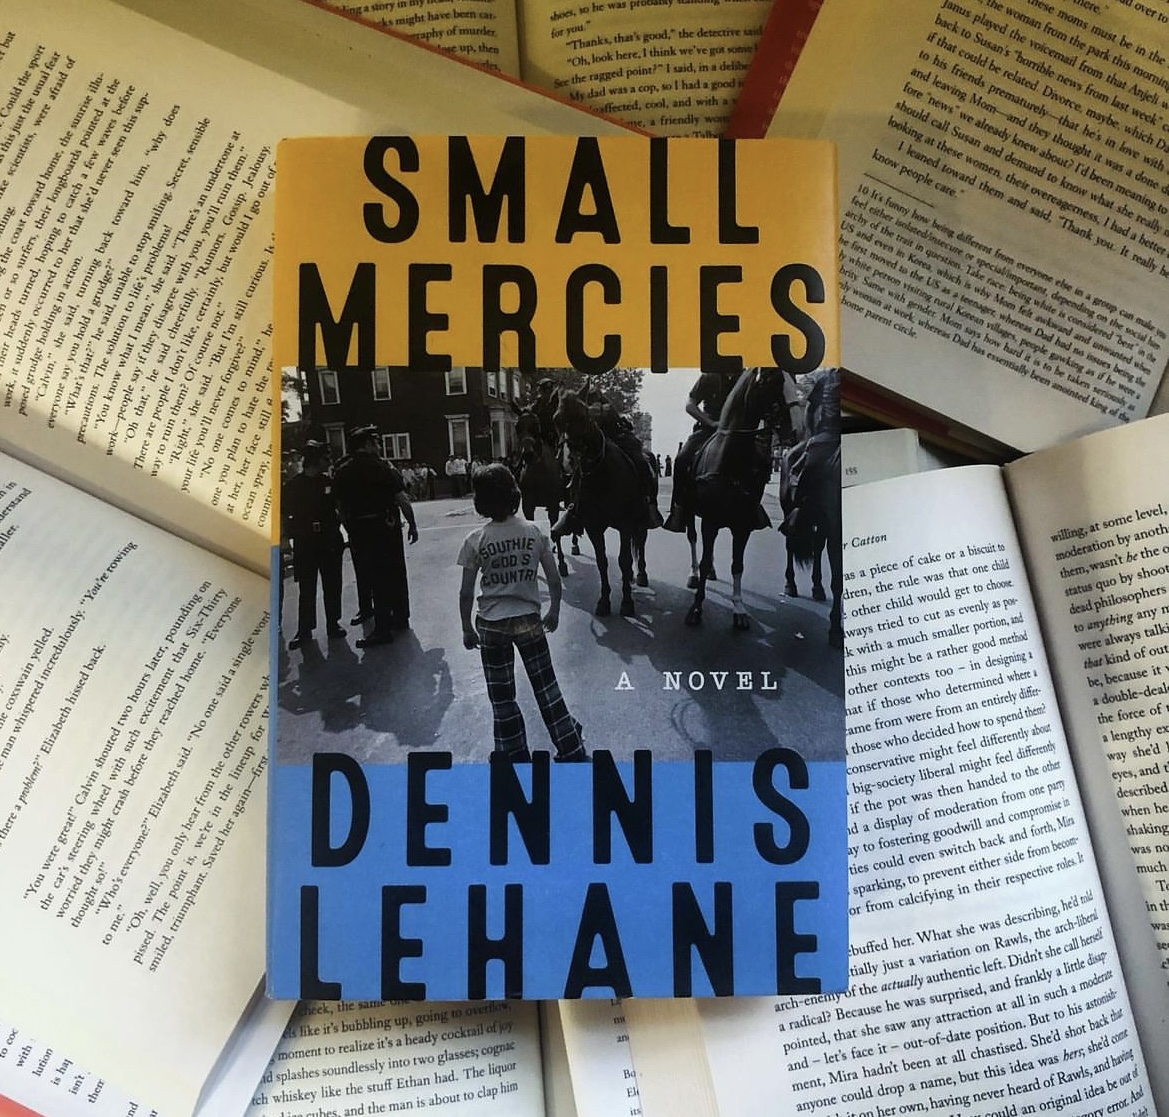 book review of novel small mercies by dennis lehane